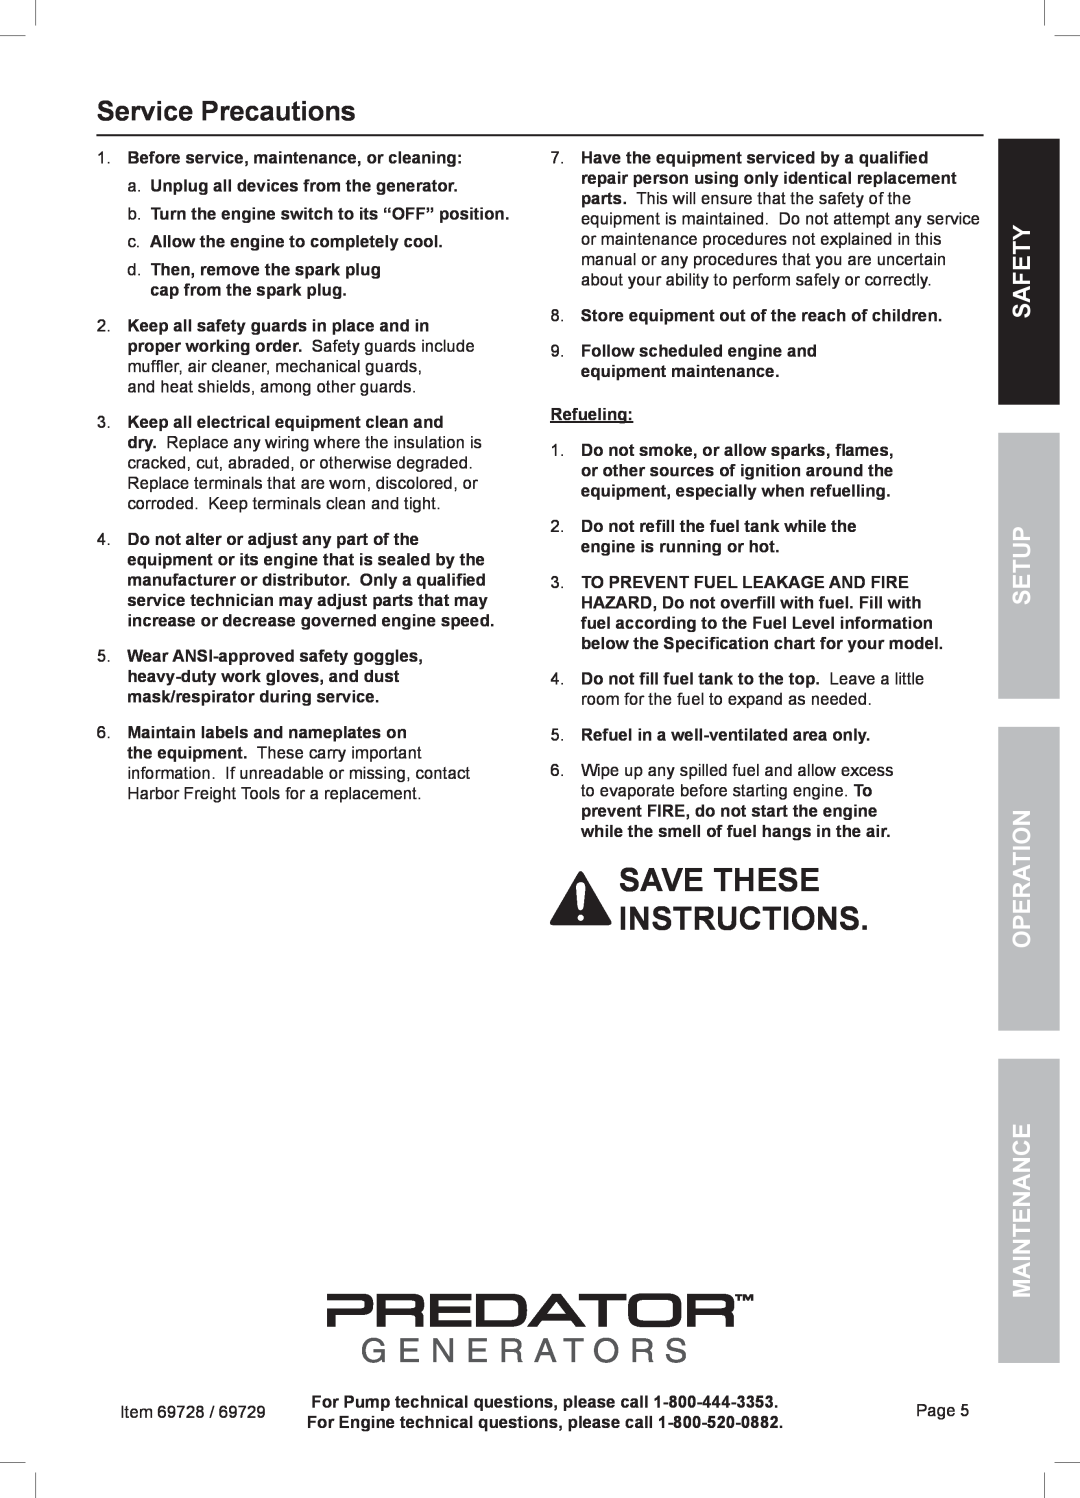 Harbor Freight Tools 69728 owner manual Service Precautions, Setup, Maintenance, Save these instructions, Safety, Operation 